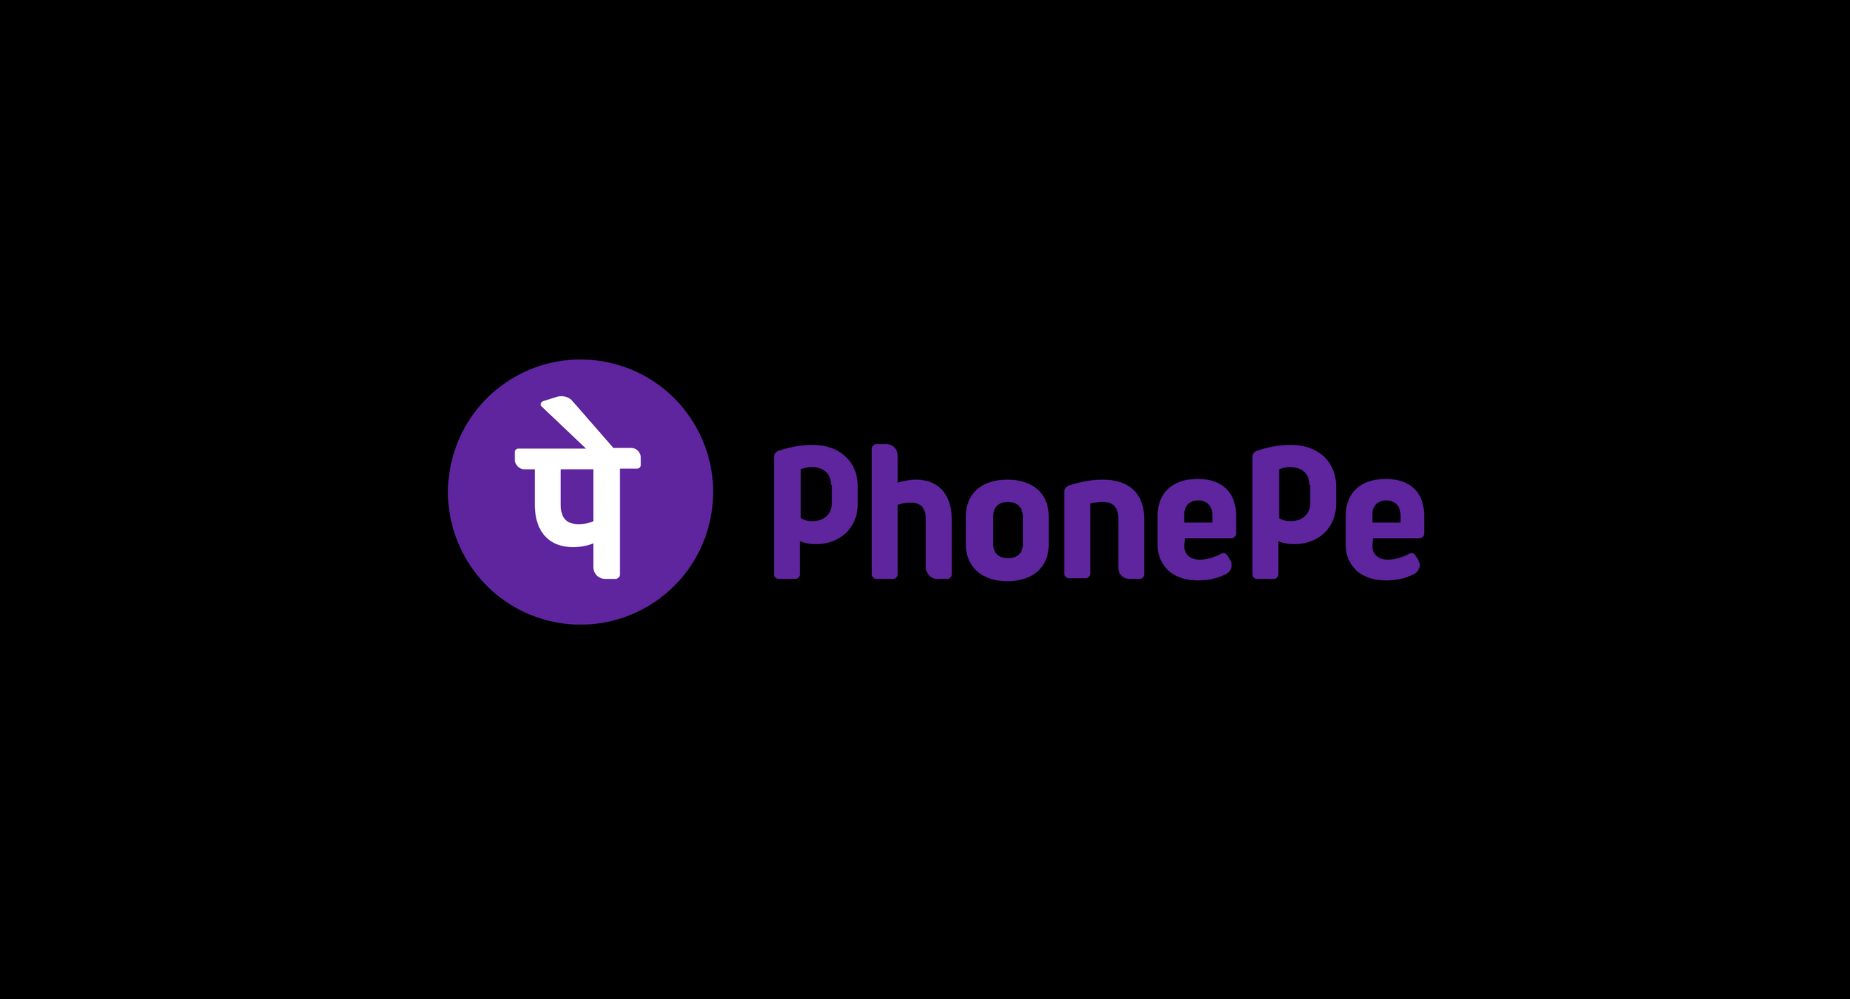 PhonePe launches Indus Appstore with focus on Indian languages, gaming